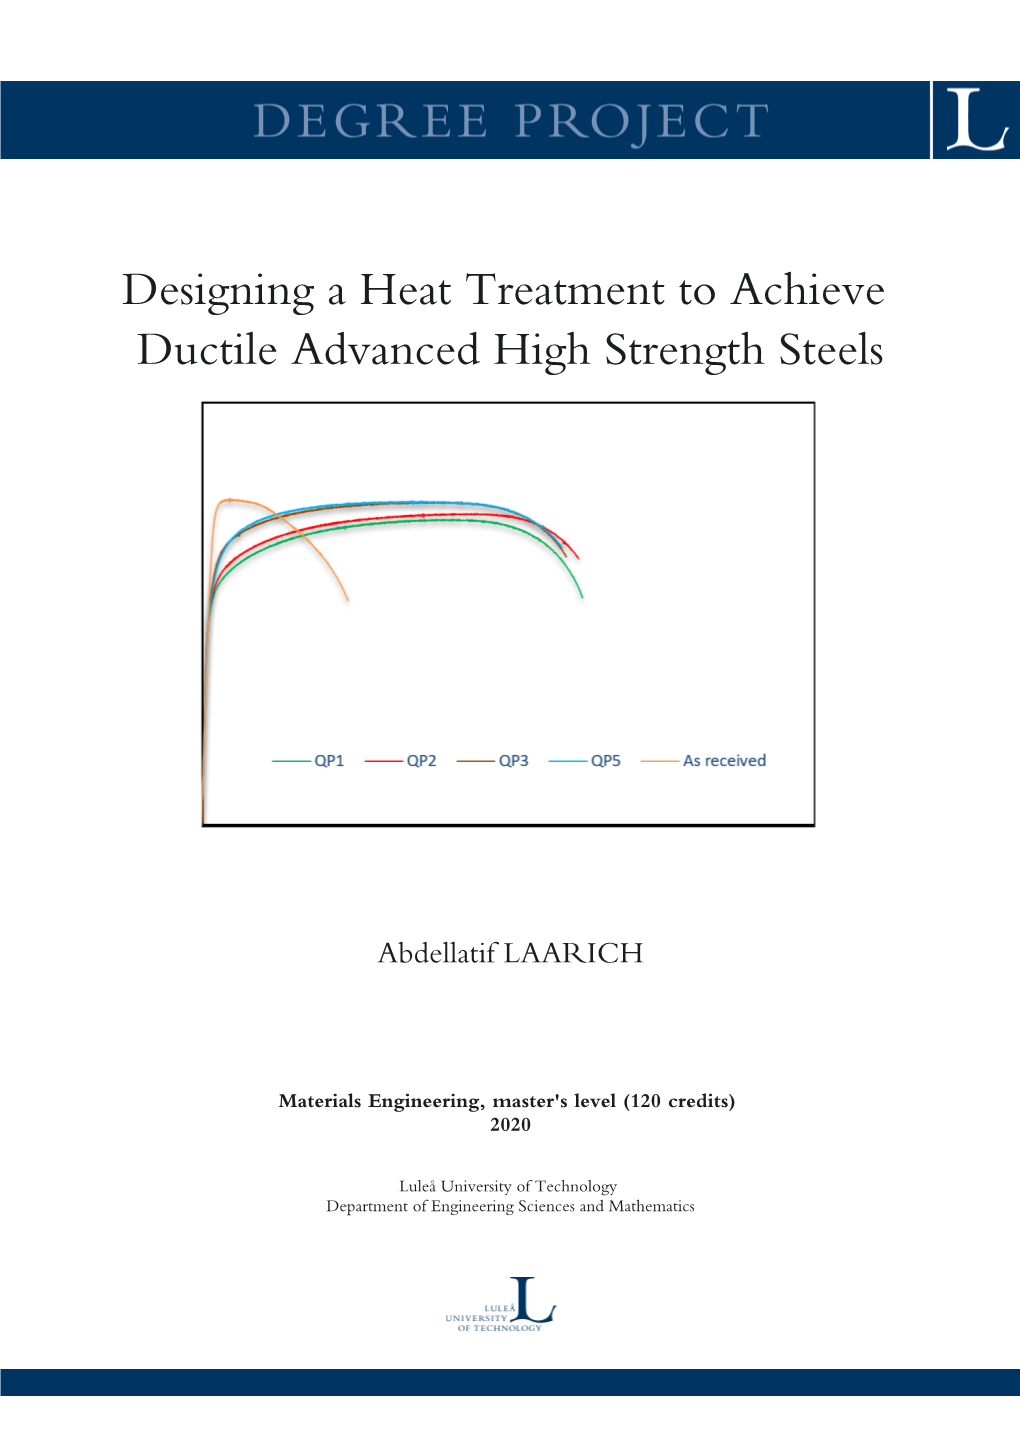 Designing a Heat Treatment to Achieve Ductile Advanced High Strength Steels